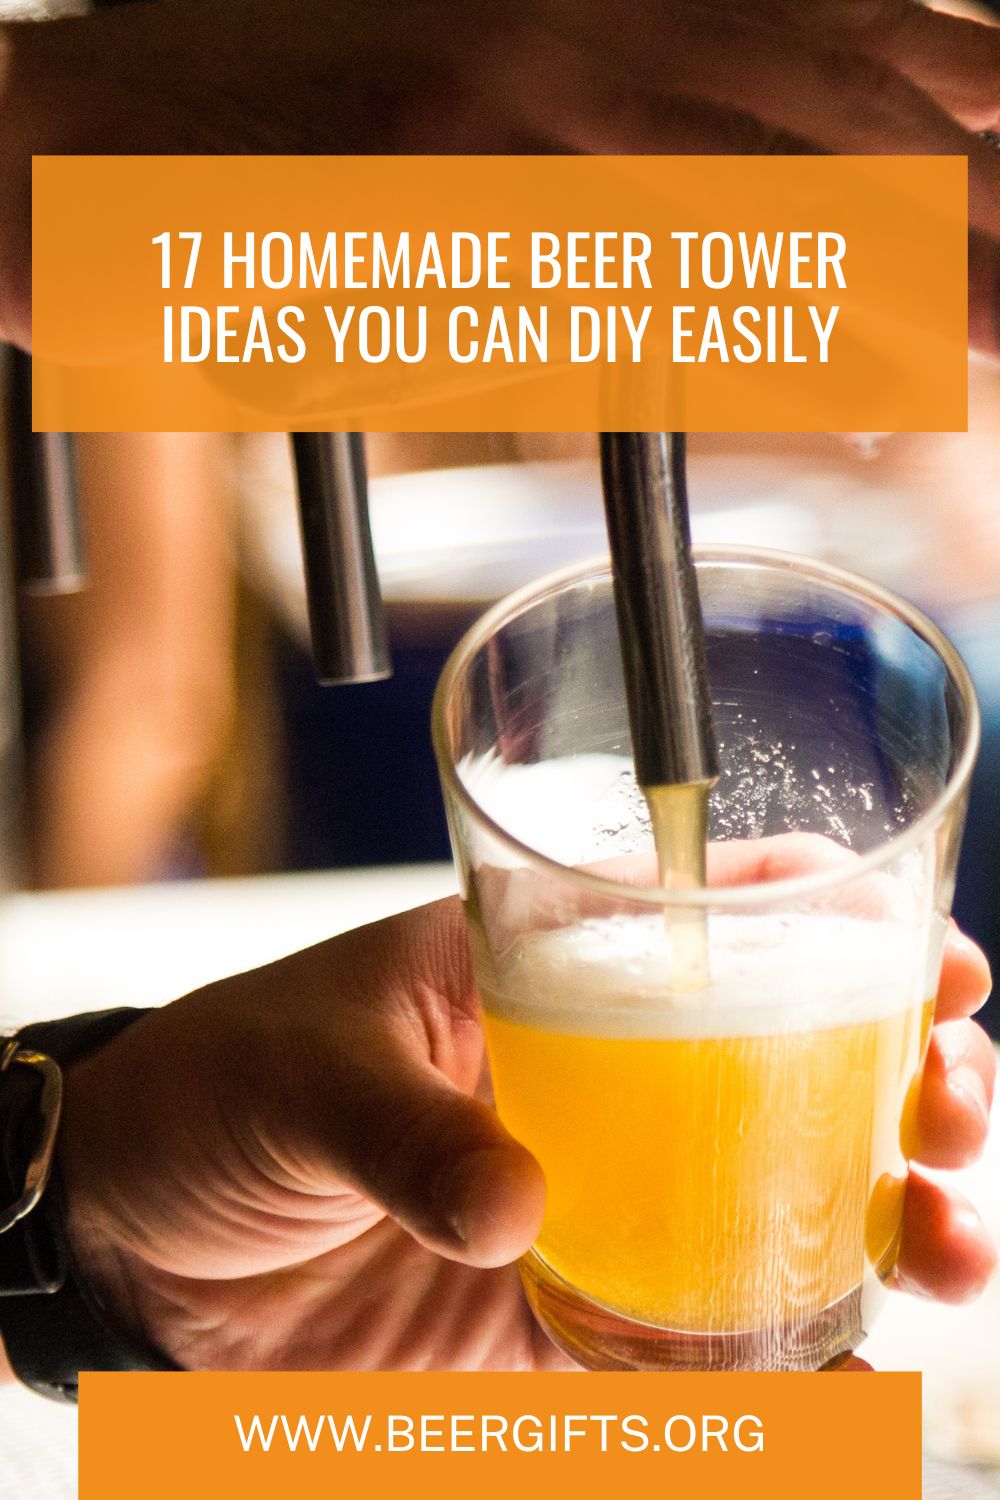 17 Homemade Beer Tower Ideas You Can DIY Easily8